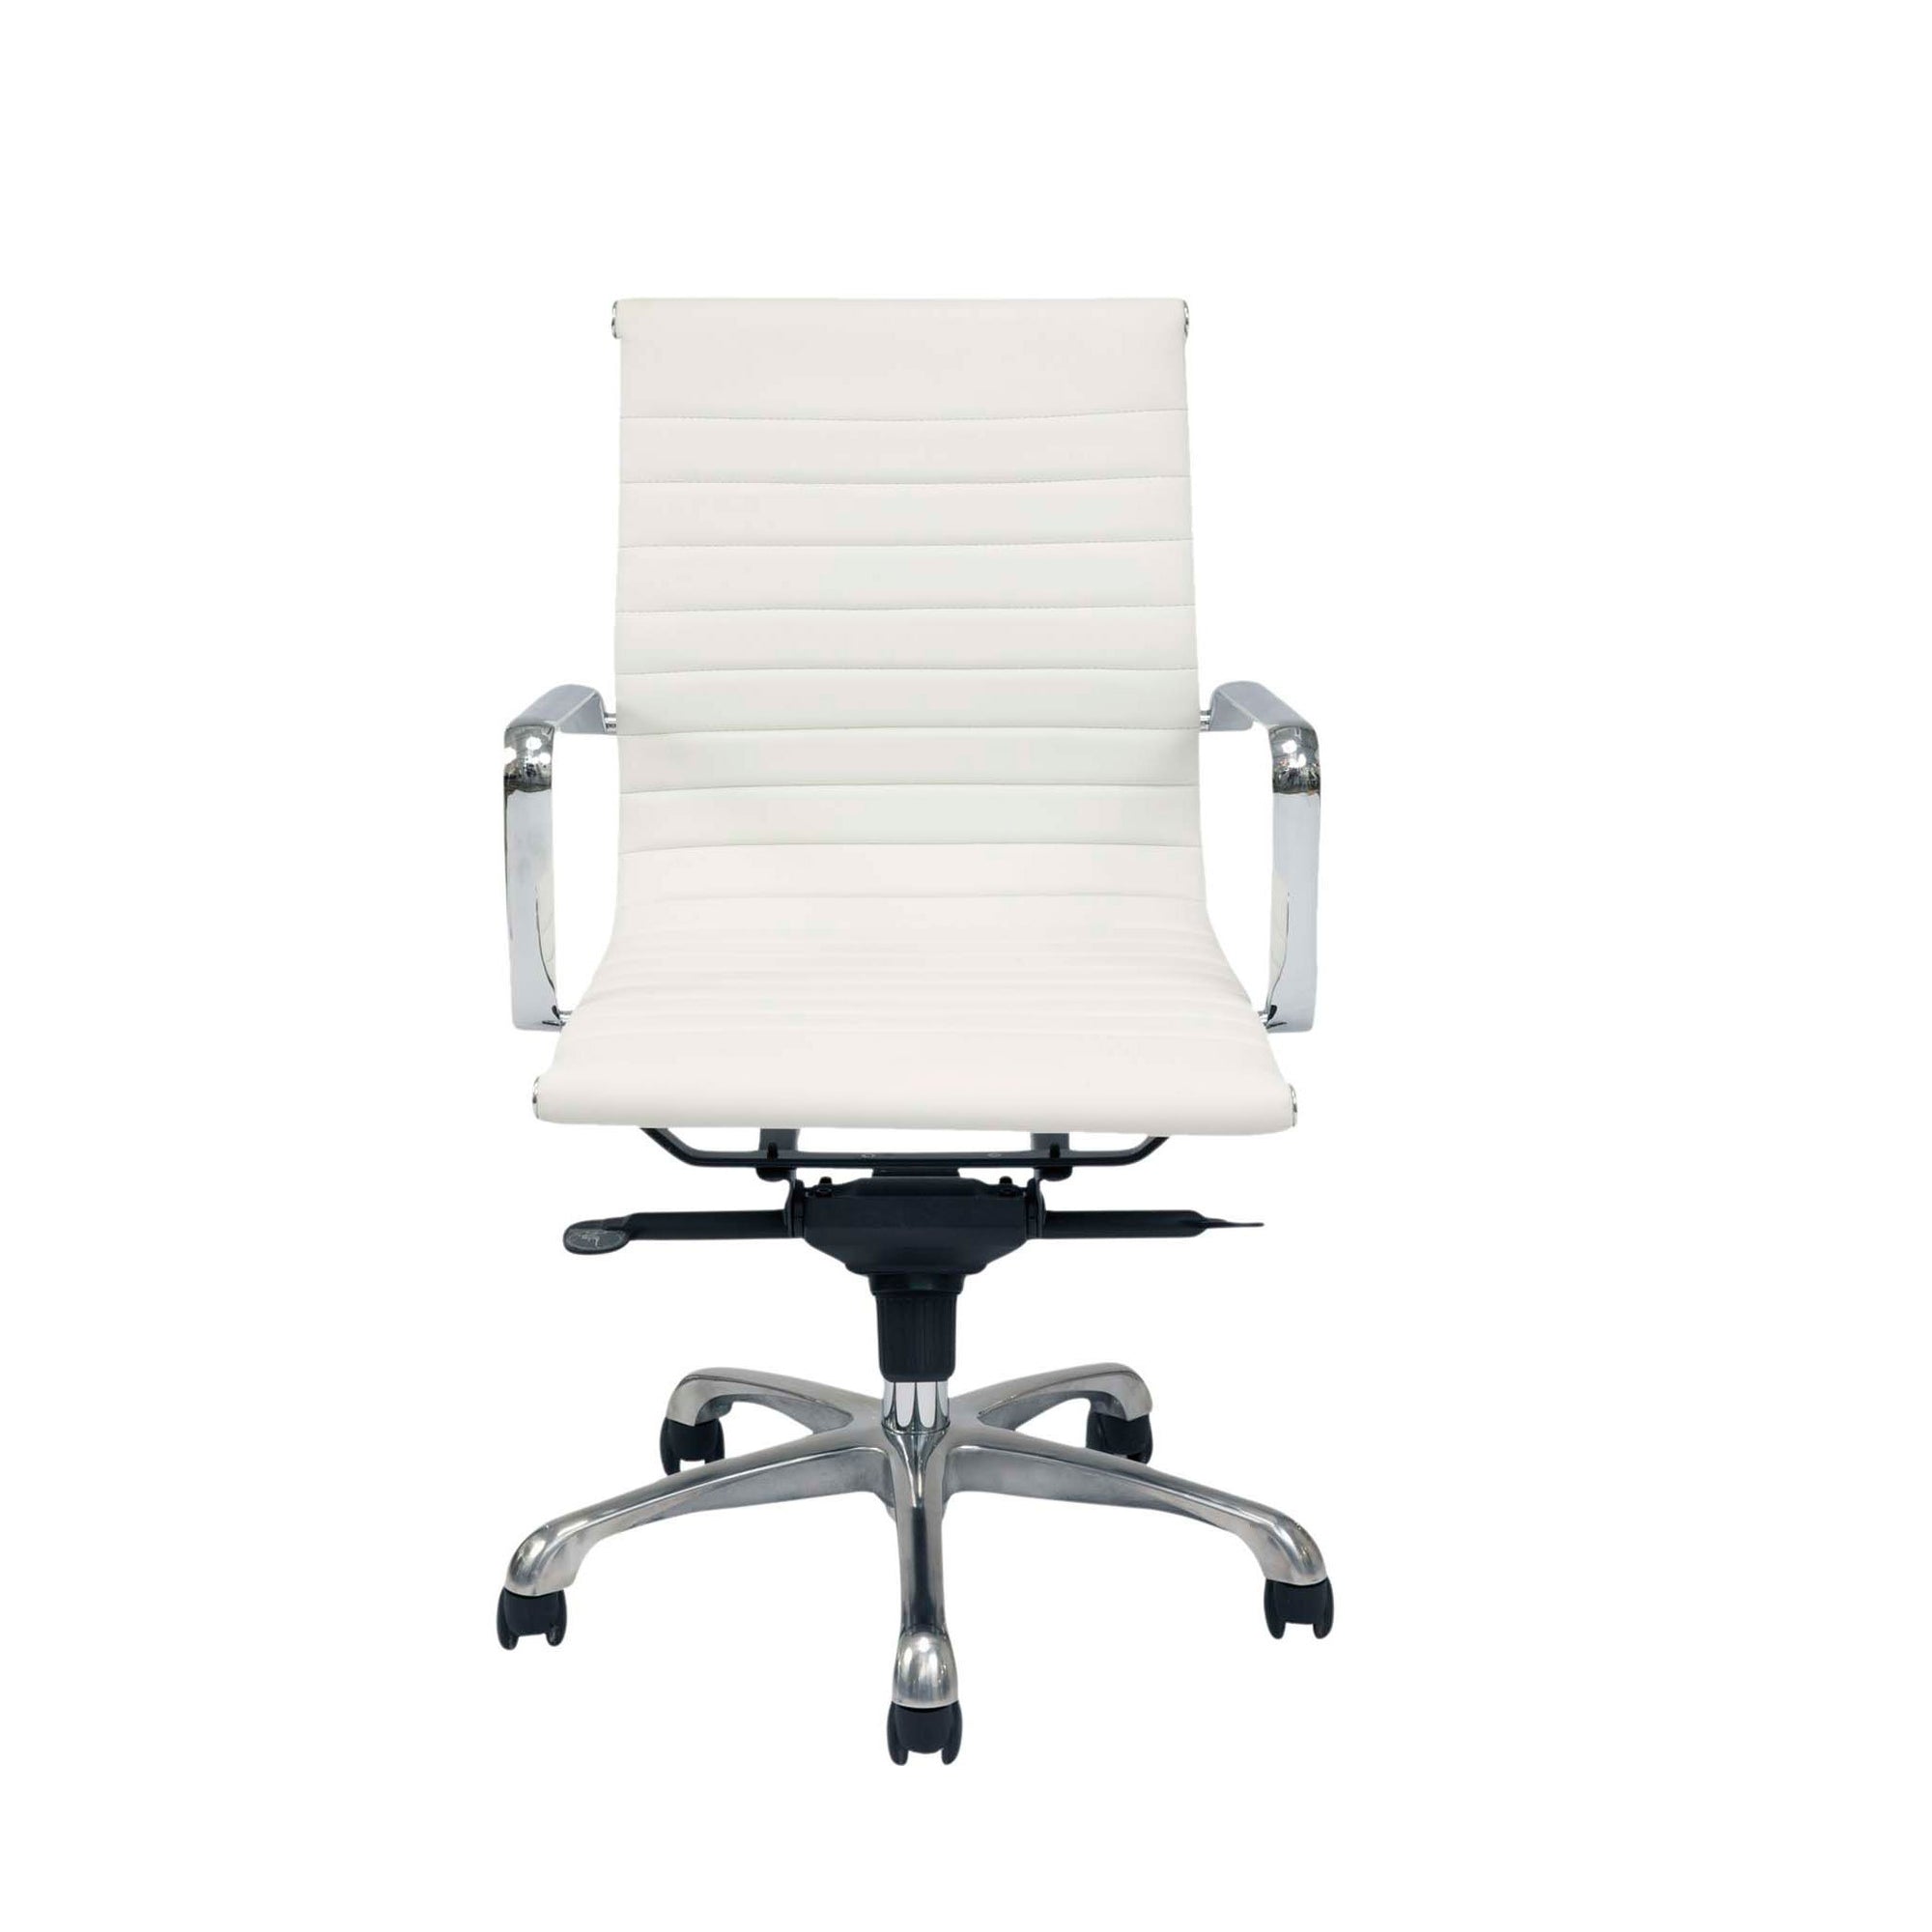 MOES-OMEGA OFFICE CHAIR LOW BACK-Office Chairs-MODTEMPO